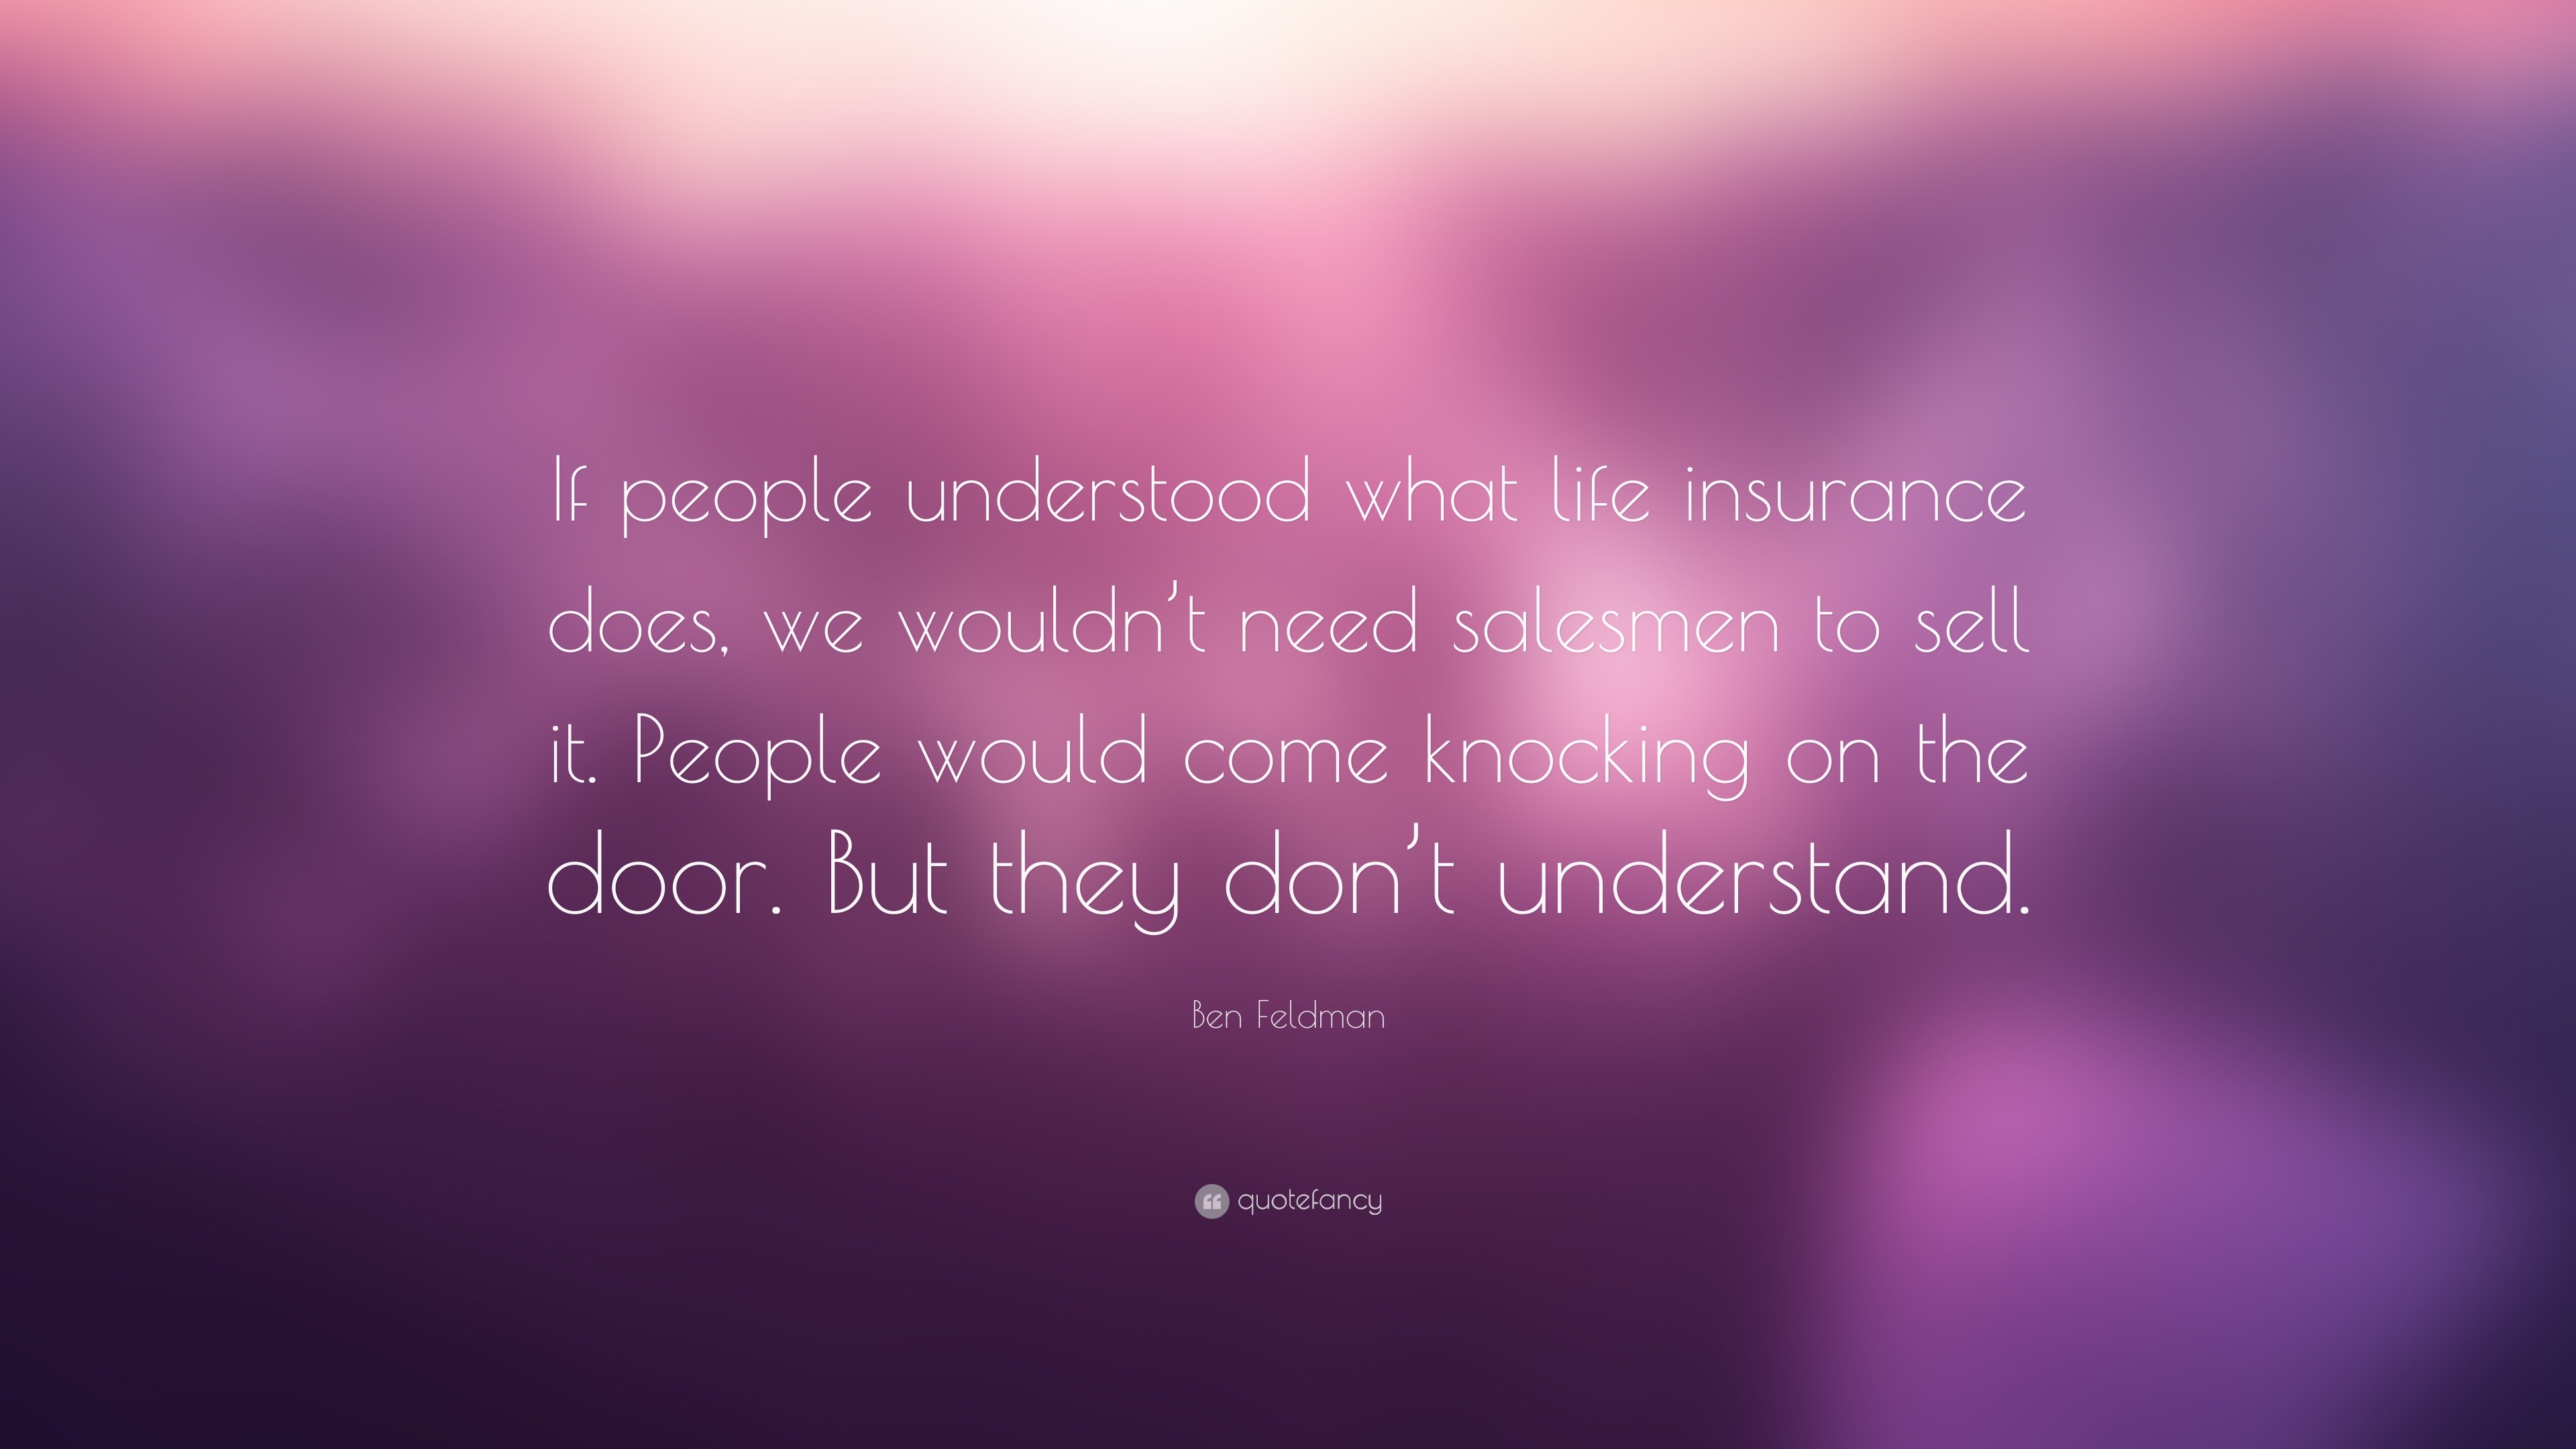 Ben Feldman Quote “If people understood what life insurance does we wouldn